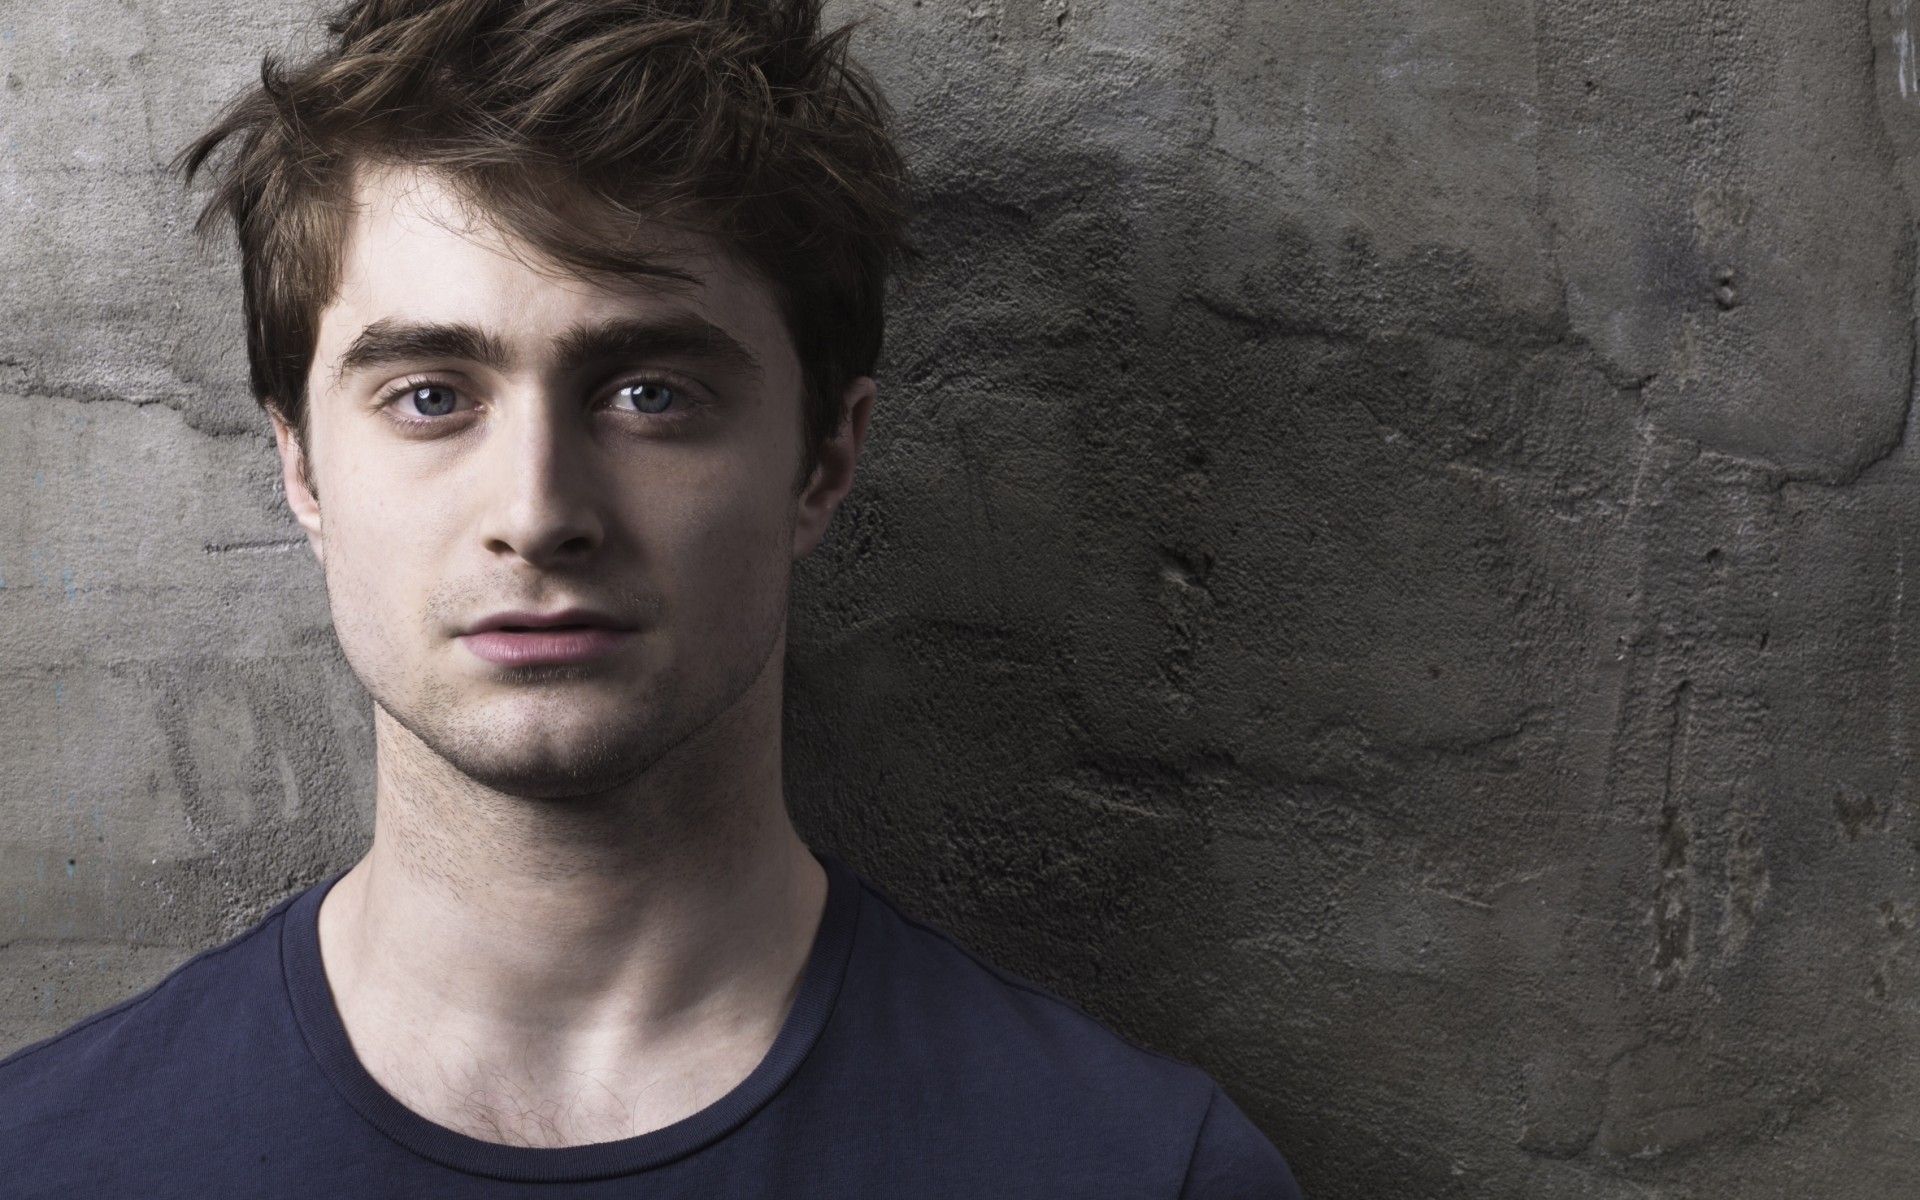 Daniel Radcliffe Wallpapers High Resolution and Quality Download